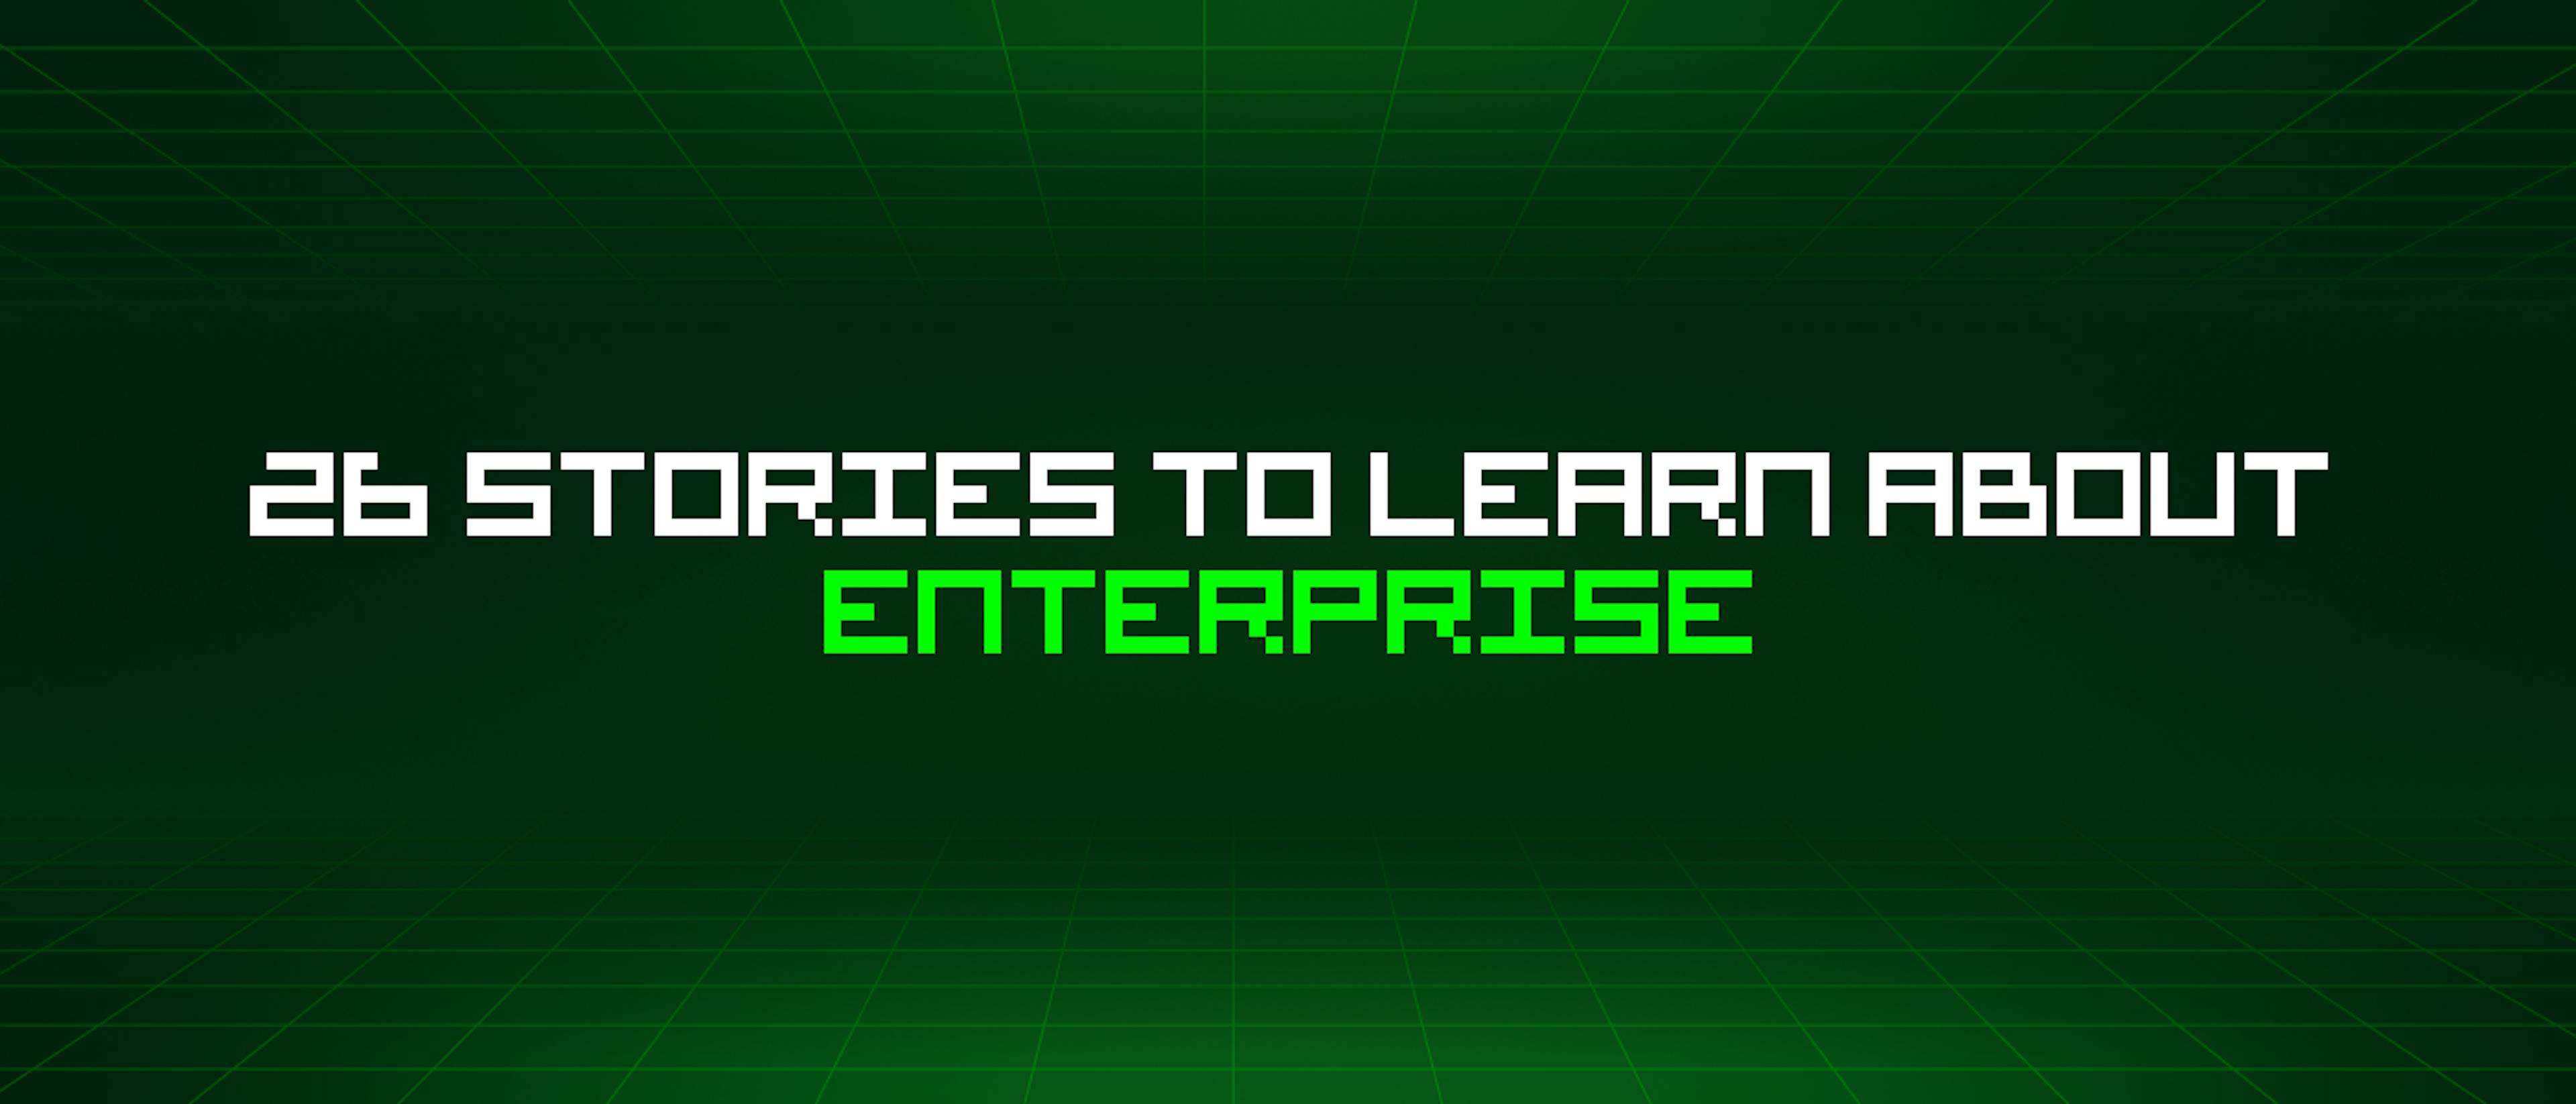 featured image - 26 Stories To Learn About Enterprise